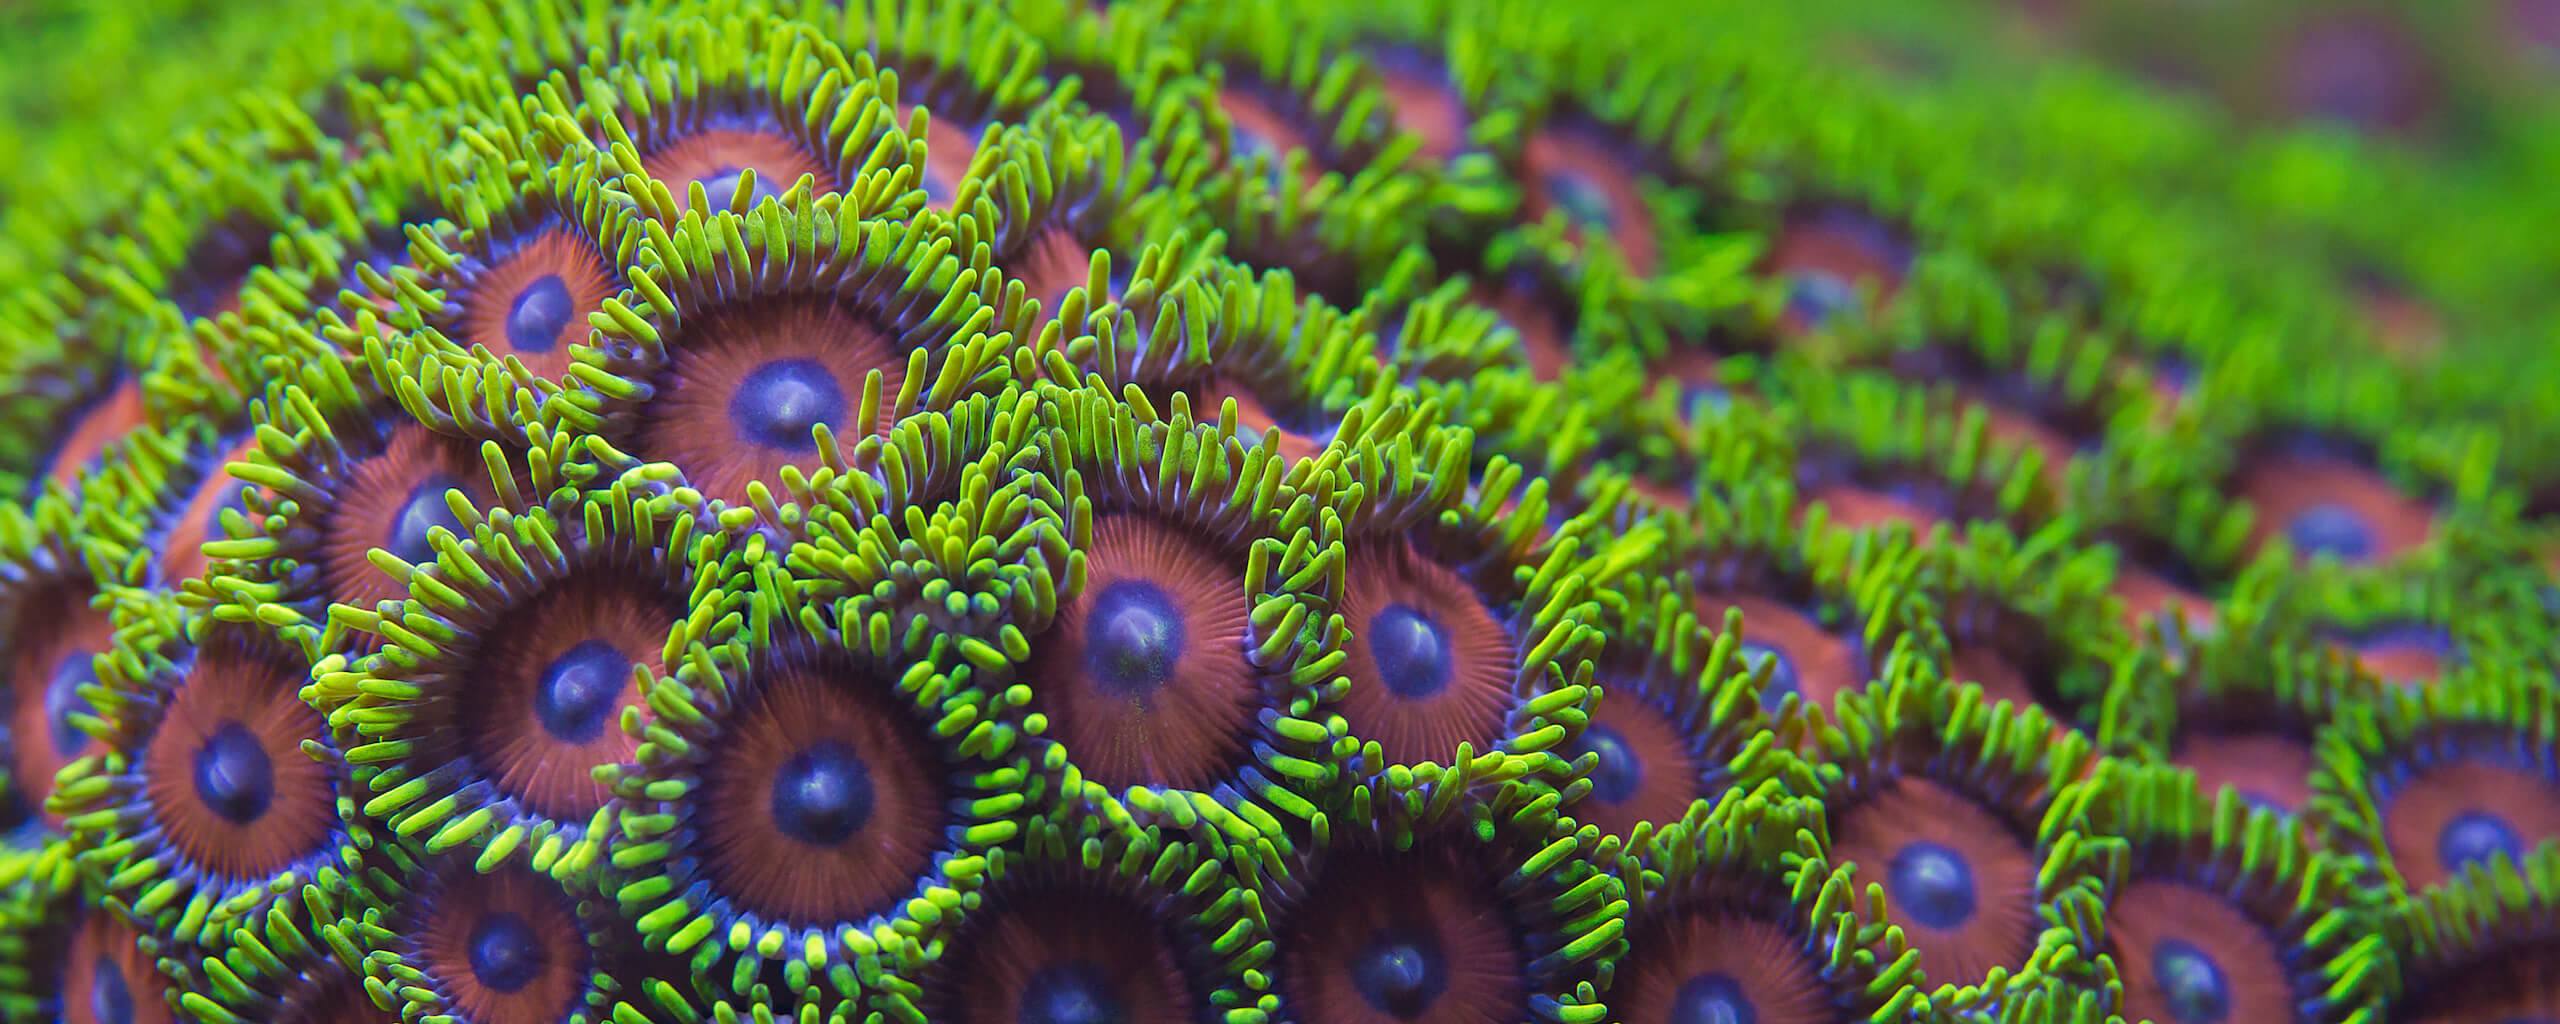 Close-up photo of watermelon zoanthid coral